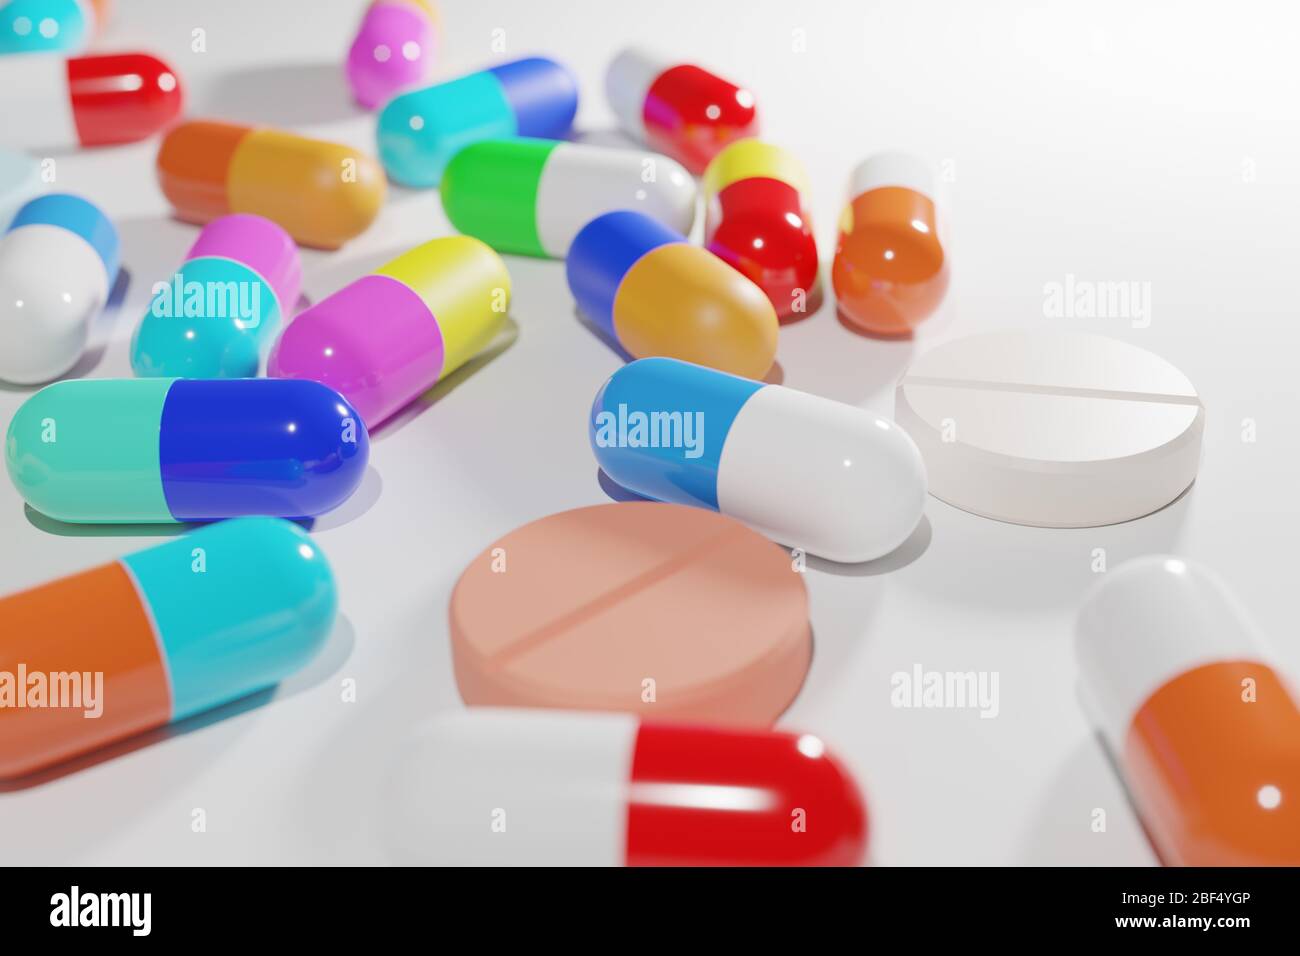 Medicine tab capsule pill and drug tablet mix colour colorful set on white 3D rendering. Stock Photo